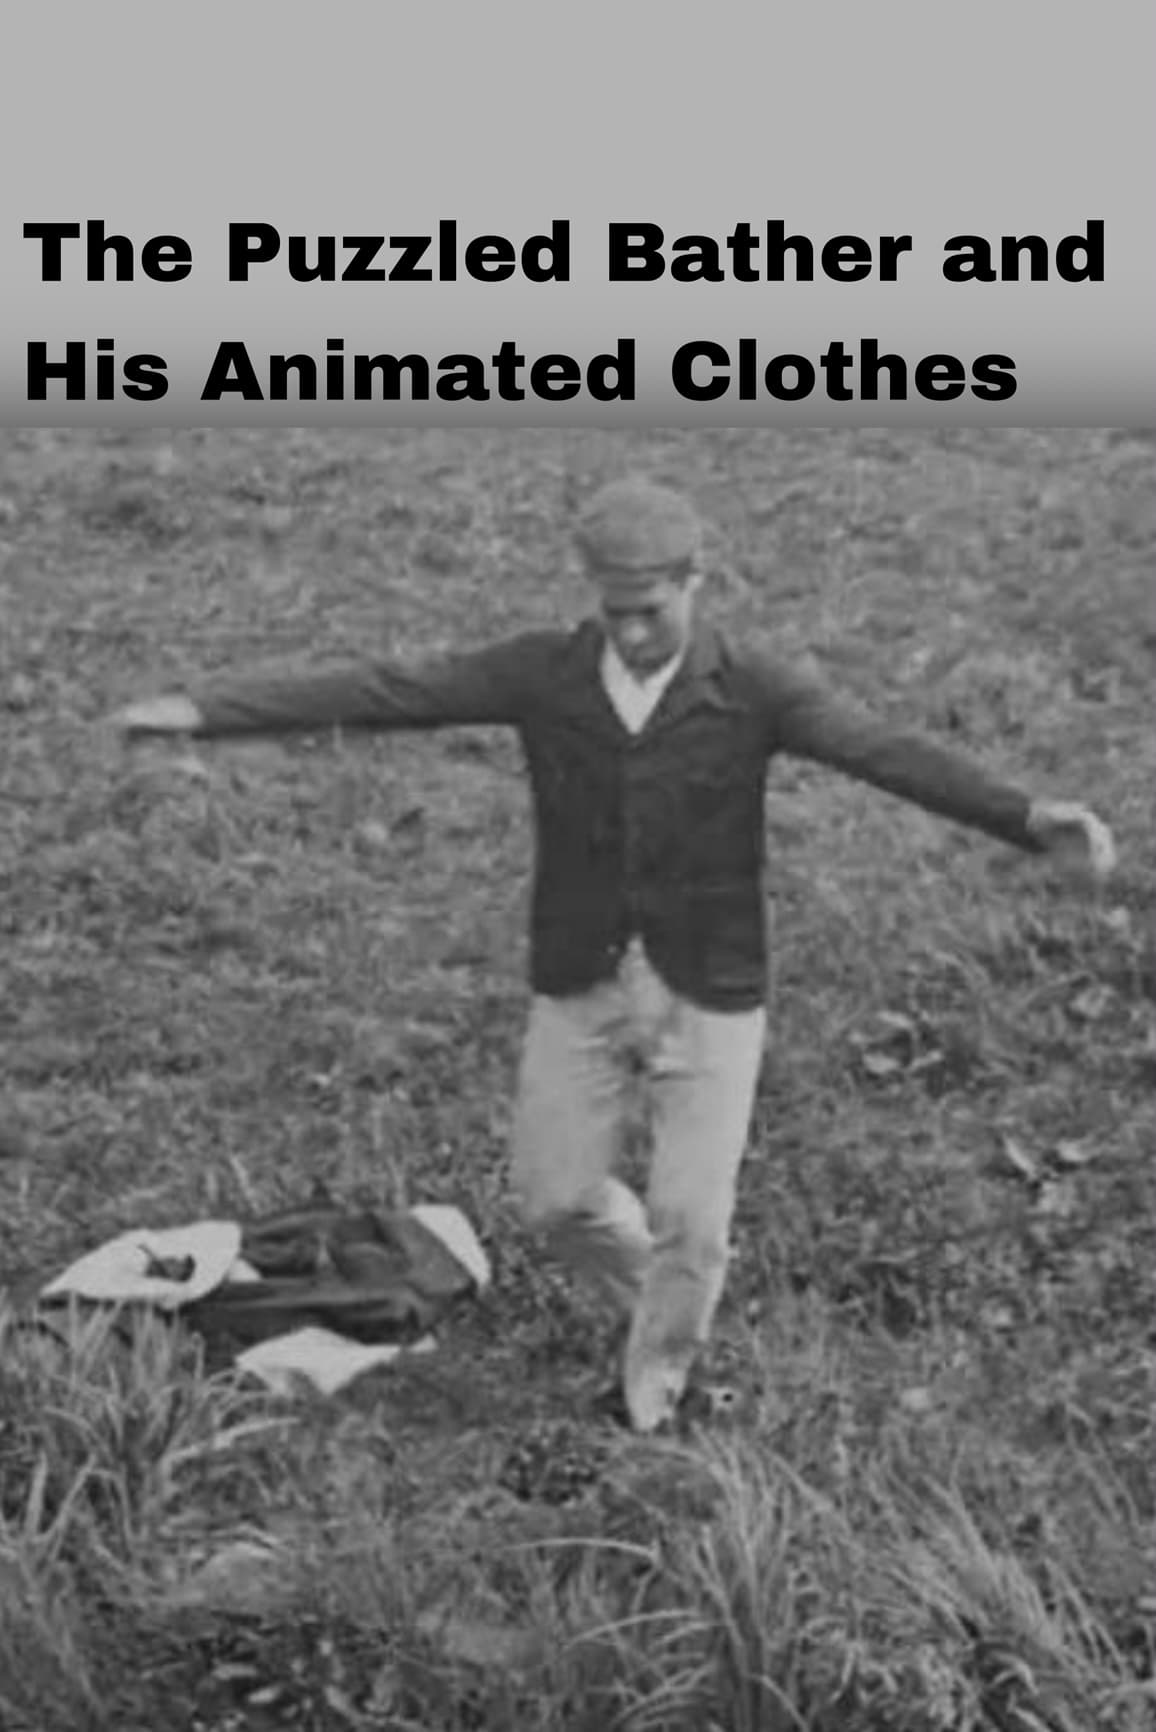 The Puzzled Bather and His Animated Clothes